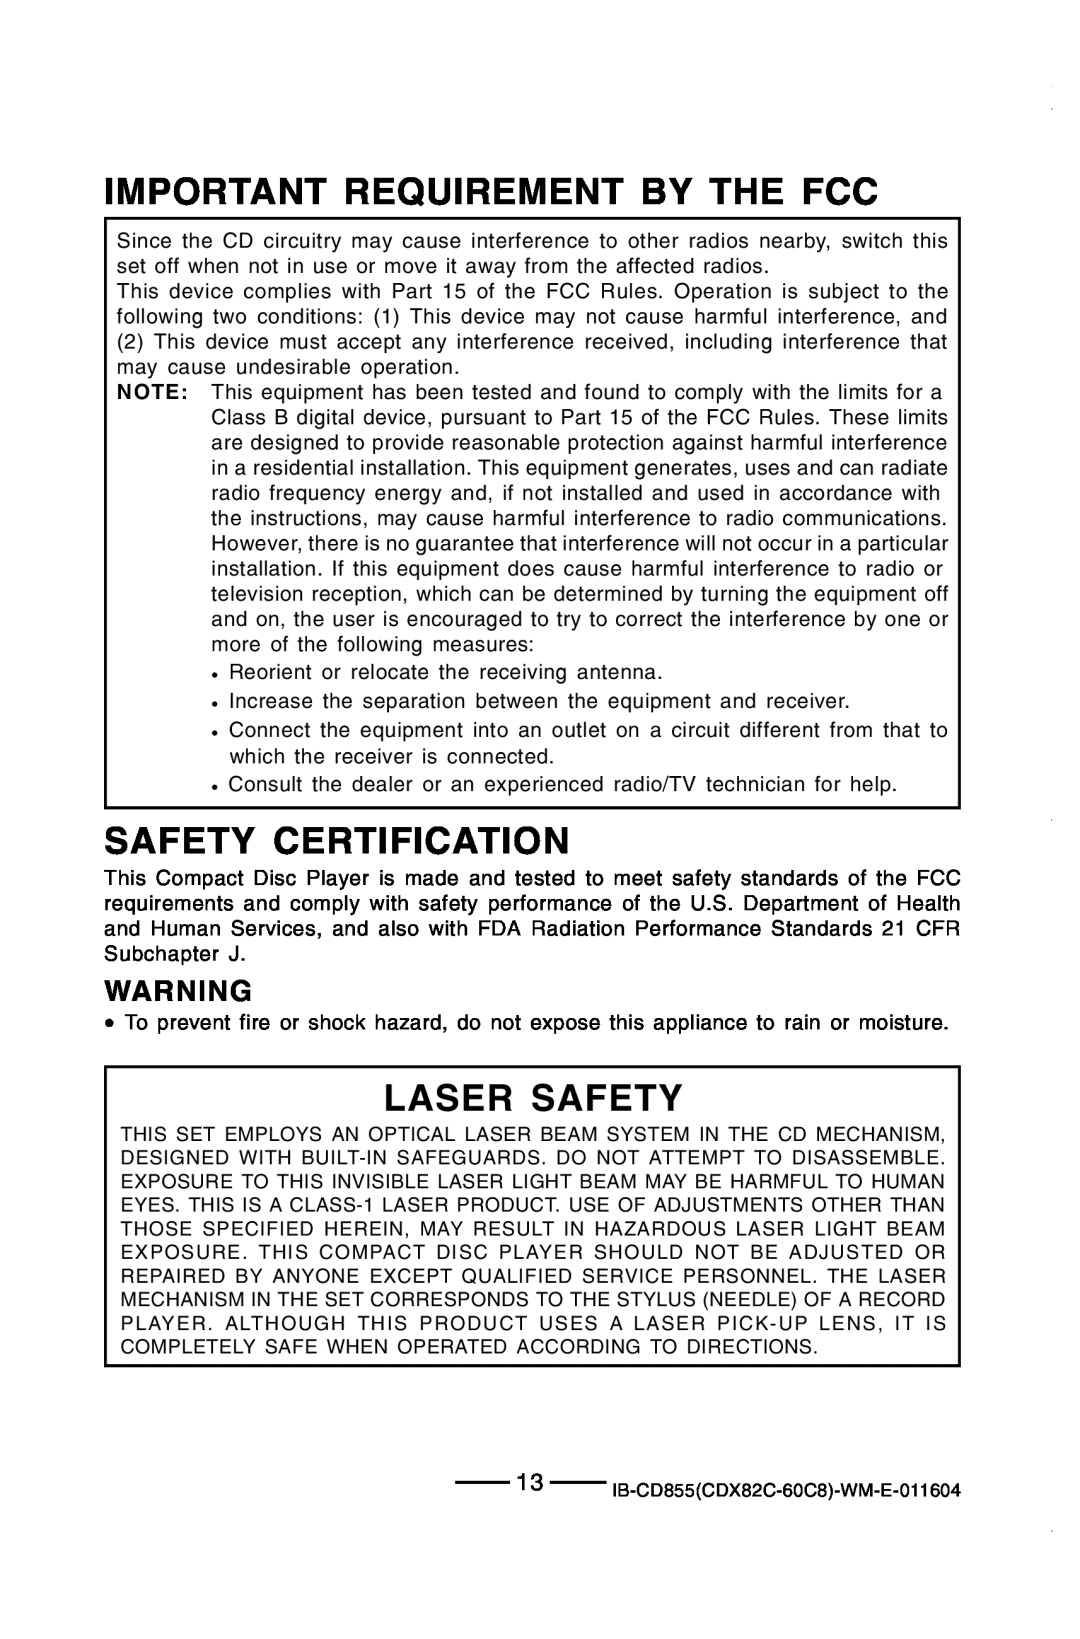 Durabrand CD-855 manual Important Requirement By The Fcc, Safety Certification, Laser Safety 